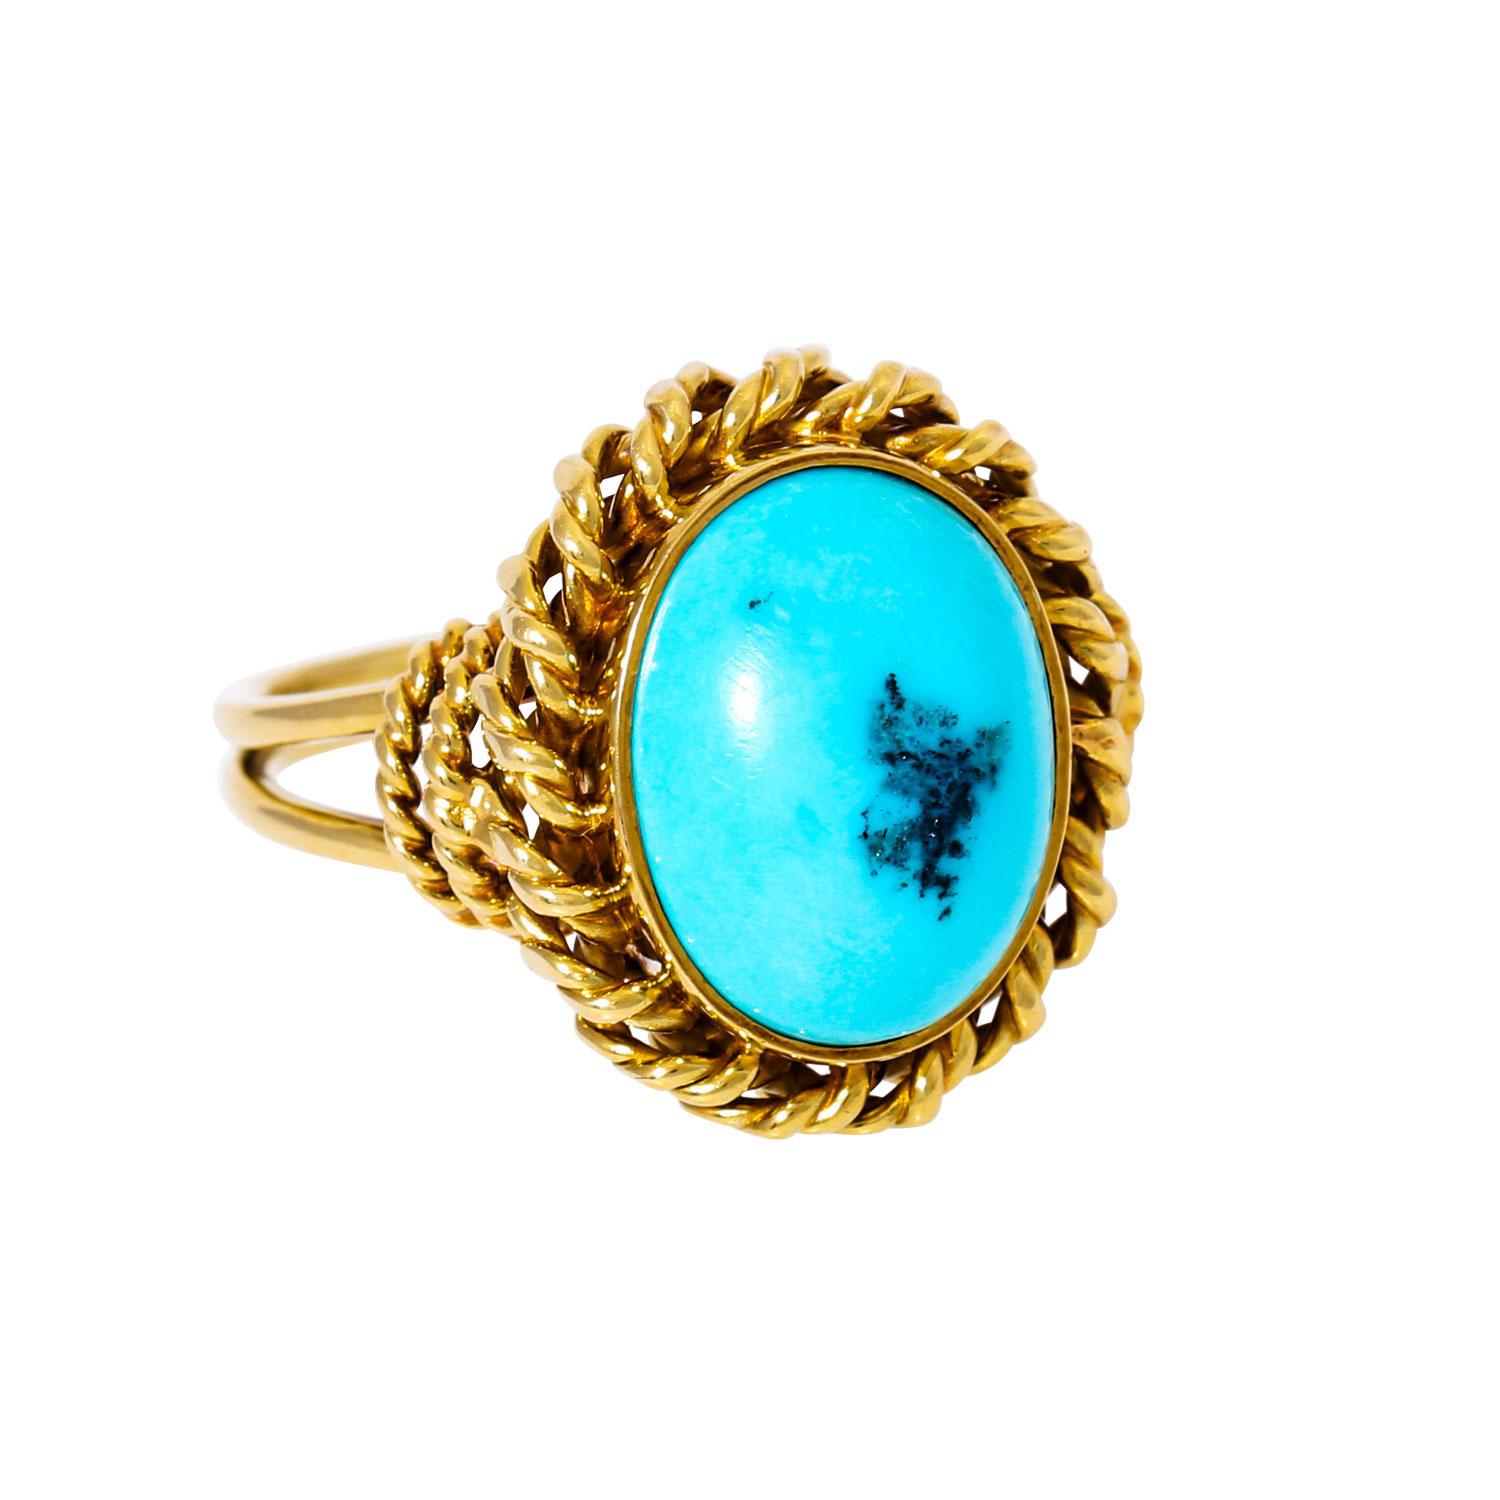 approx. 1.3x1 cm, GG 14 K, 5.8 g, RW: 56, middle/late 20th century, slight traces of carry.

 Ring with oval turquoise cabochon, approx. 1.3x1 cm, 14k yellow gold, ring size 56, mid/end of 20th century, minimal signs of wear.